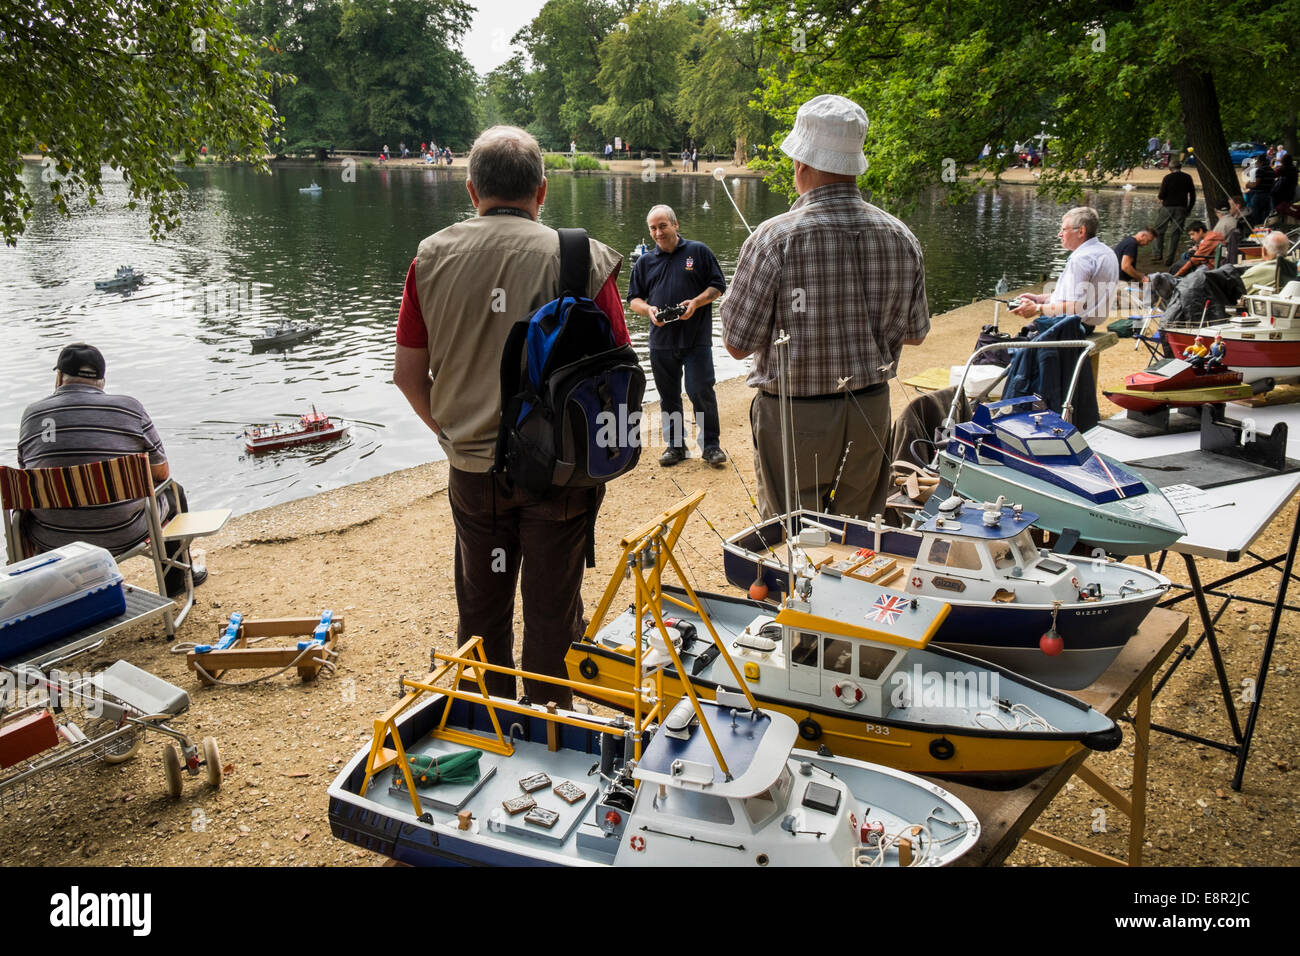 Members of the Black Park Model Boat Club sailing their boats Stock Photo